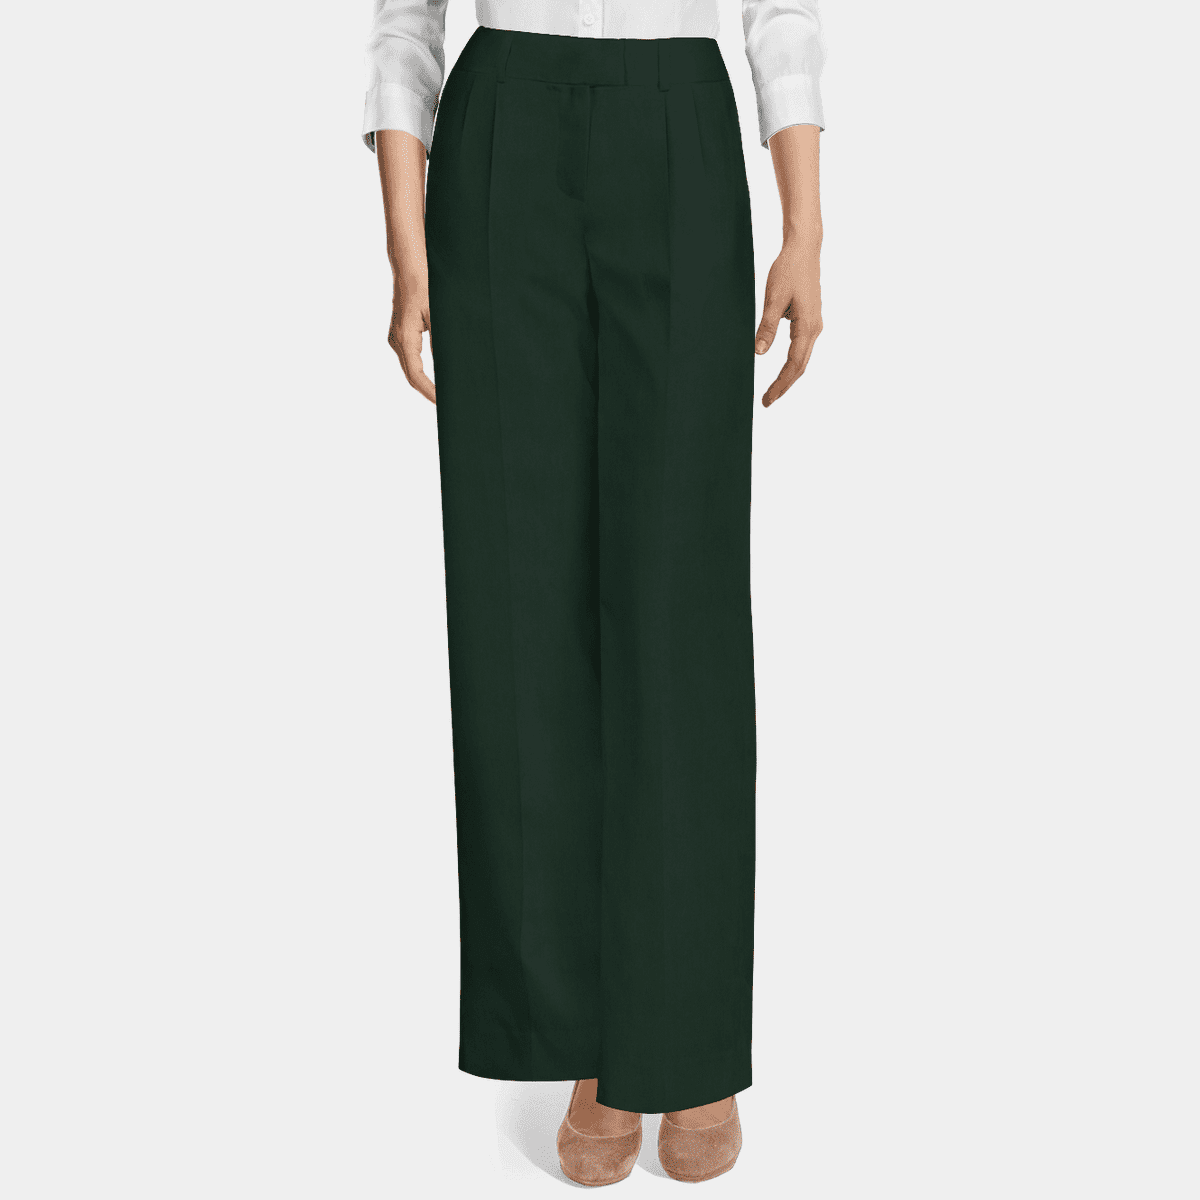 Green high waisted pleated Wide leg Pants